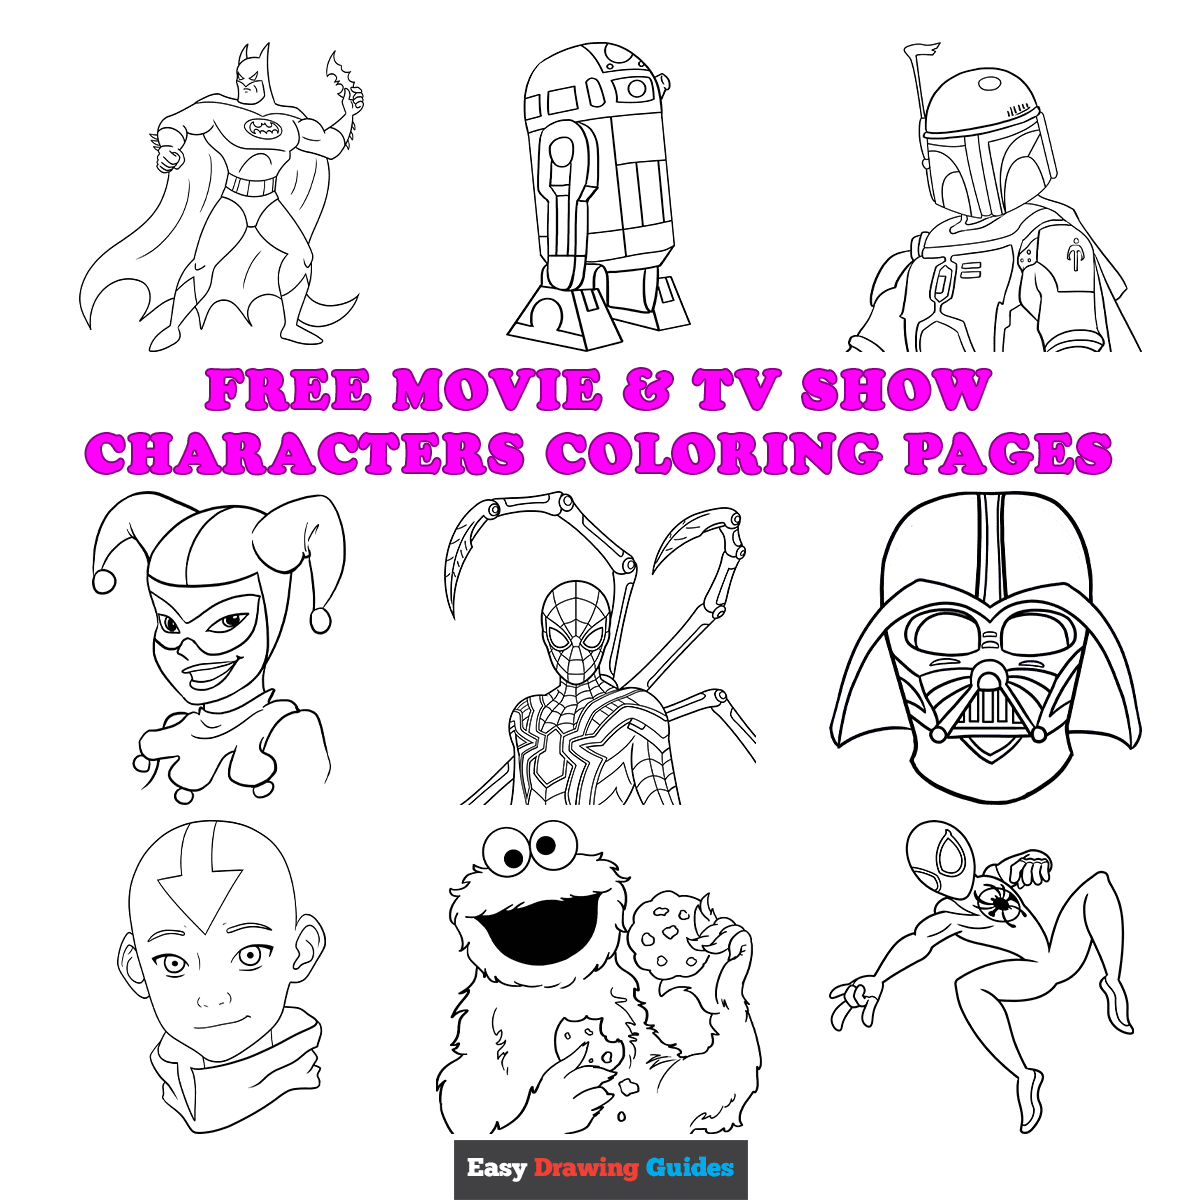 Free printable movie and tv show characters coloring pages for kids